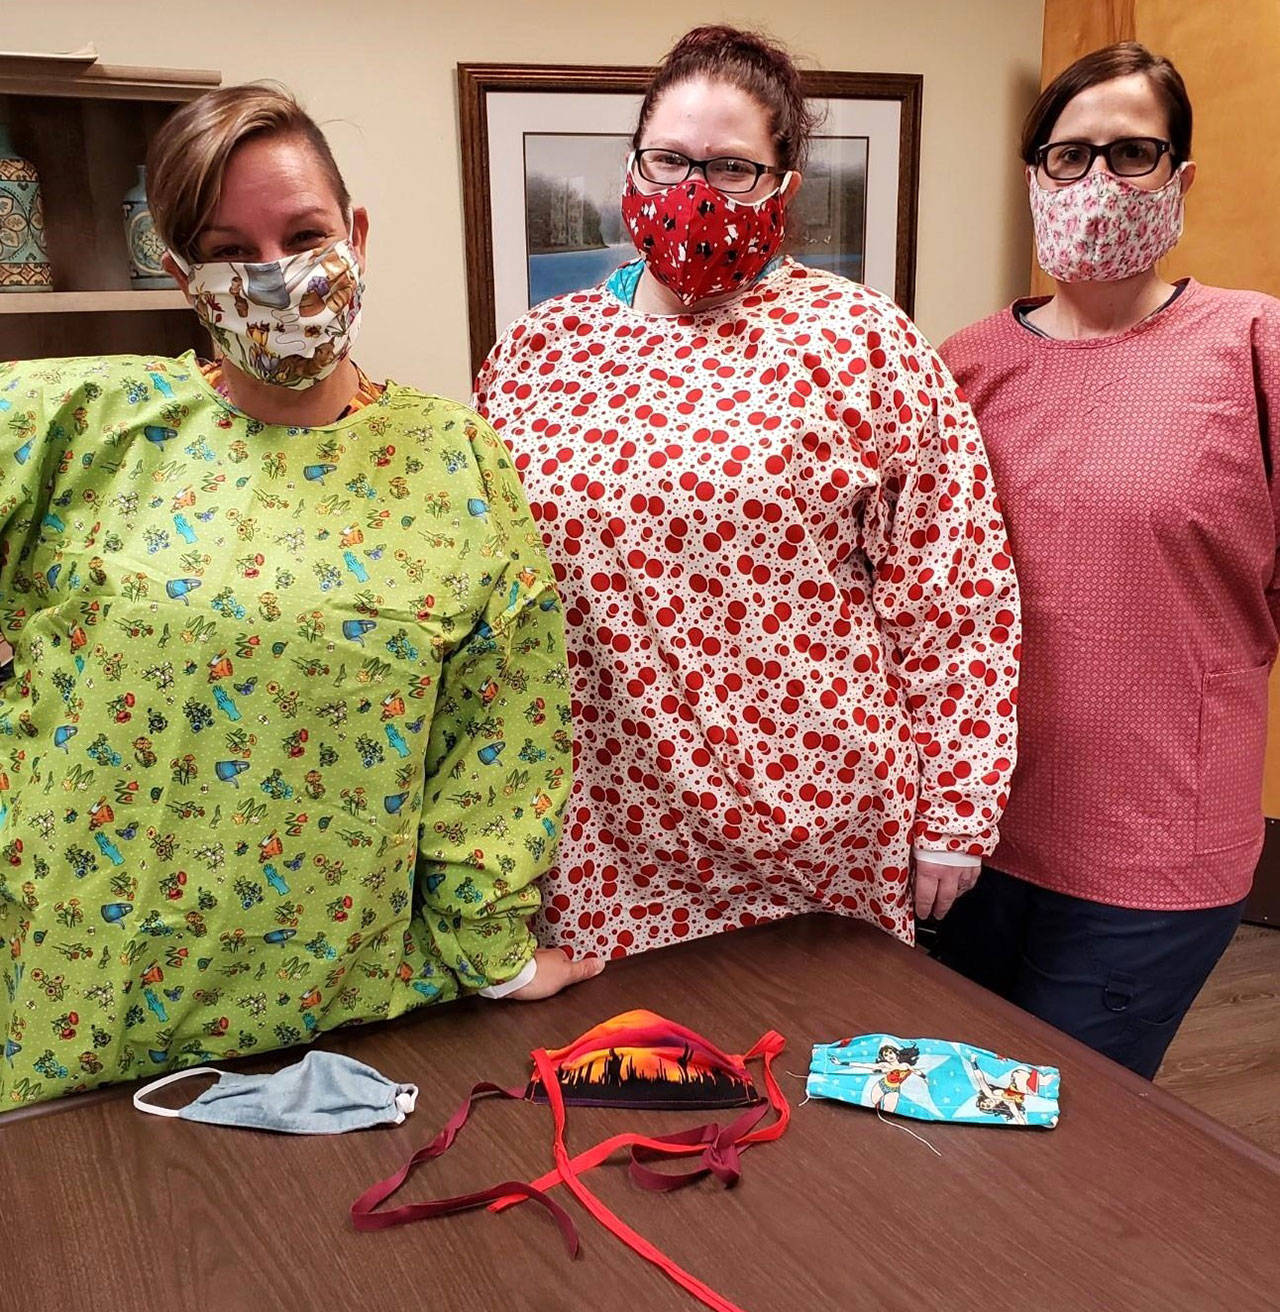 Nurses at Avamere Olympic Rehabilitation of Sequim, from left, Lynda Lyons, CNA; A.J. Henning, CNA; and Jo Talbot, RN; show masks and gowns made by members of Sunbonnet Sue Quilt Club. In total, club members made more than 4,500 face masks for community health workers. (Photo courtesy of Avamere/Sunbonnet Sue Quilt Club)